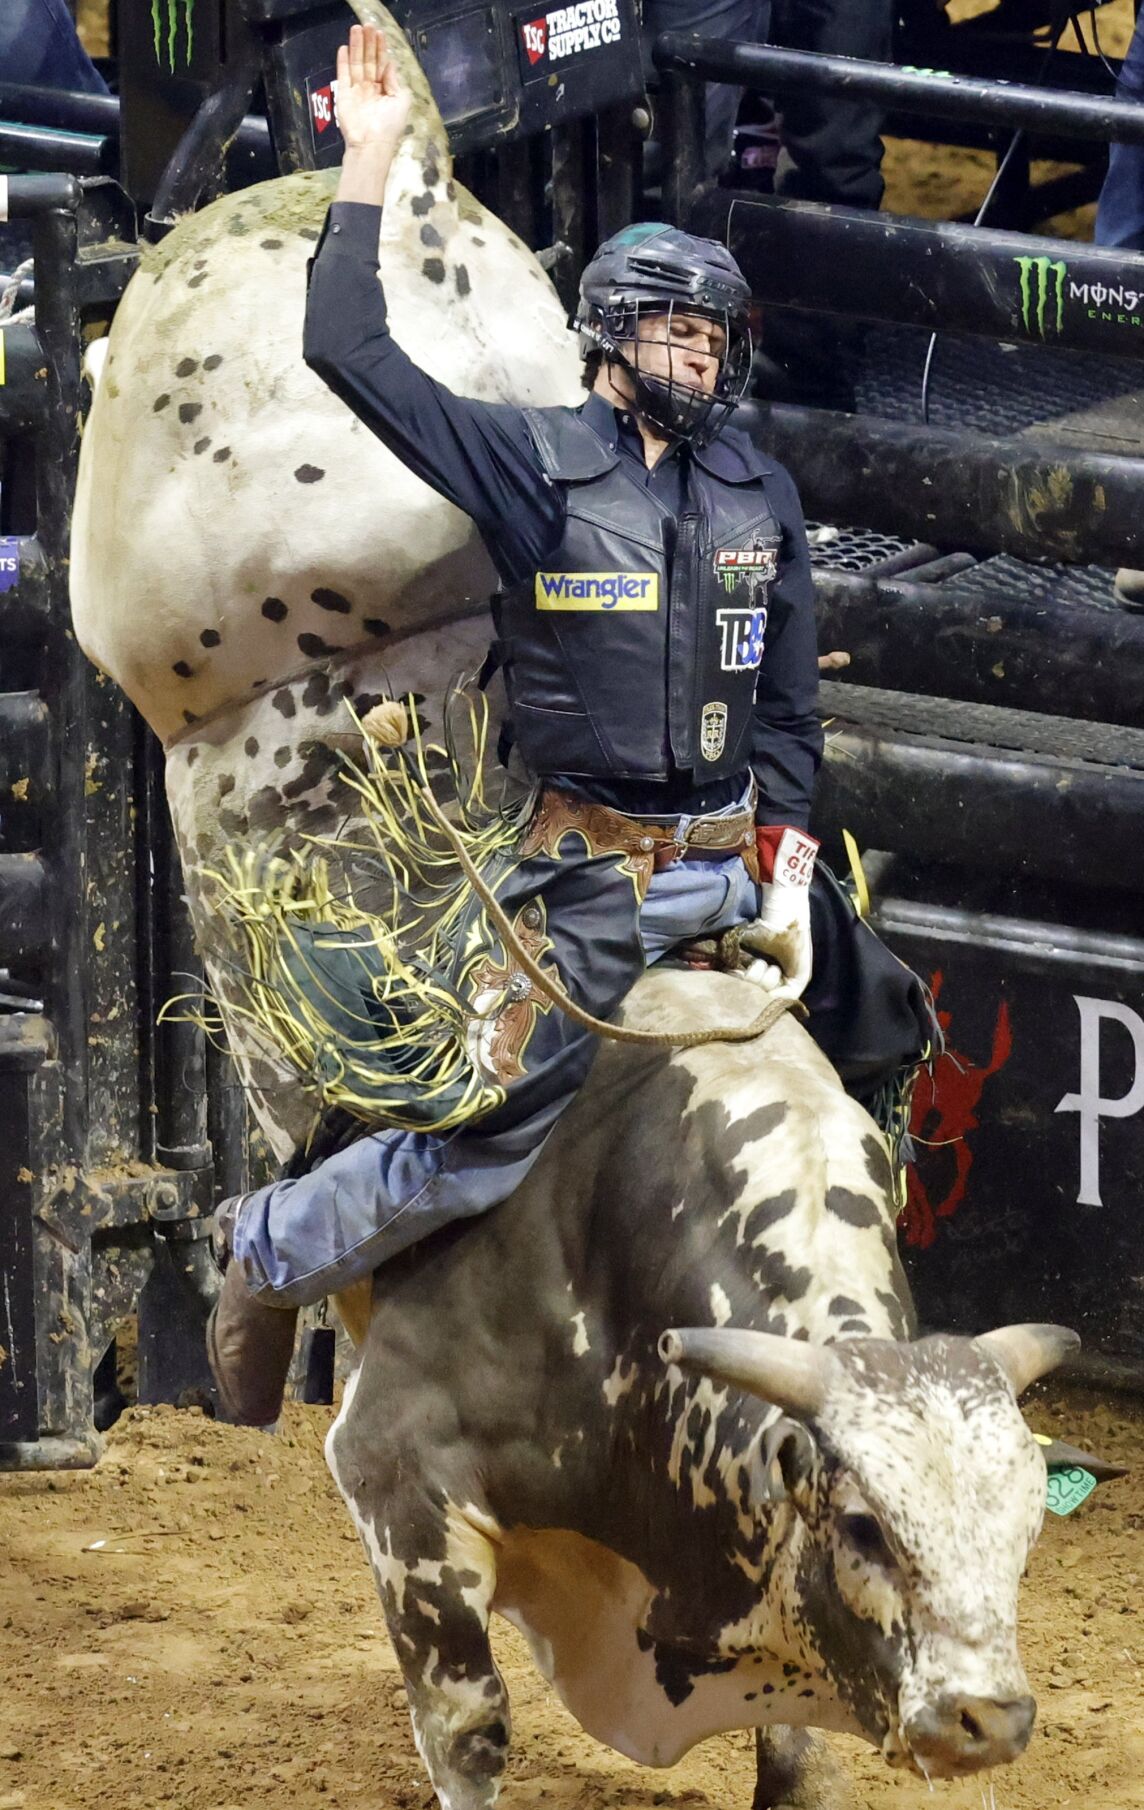 Shorty & Jessy bull fighters of the PBR - these guys risk their